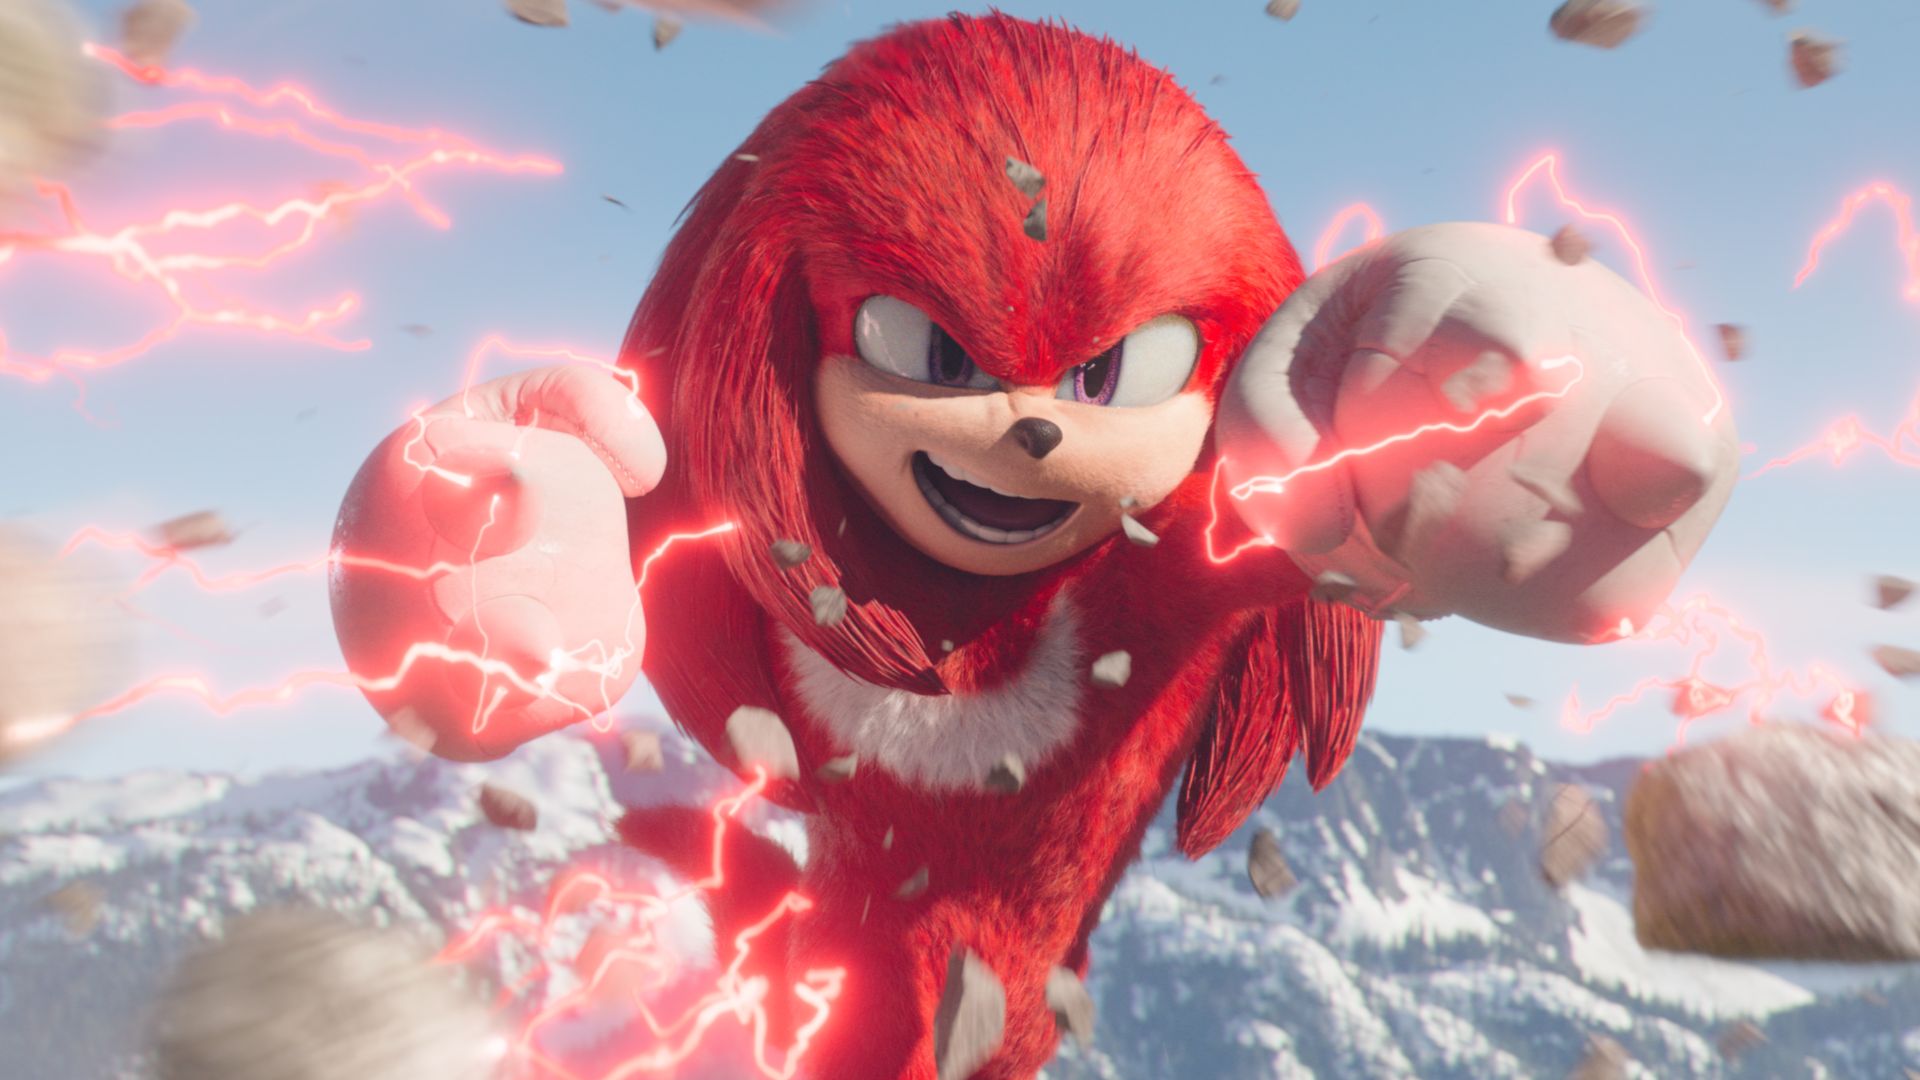 Take Knuckles for a spin - the first episode is now free to watch on YouTube